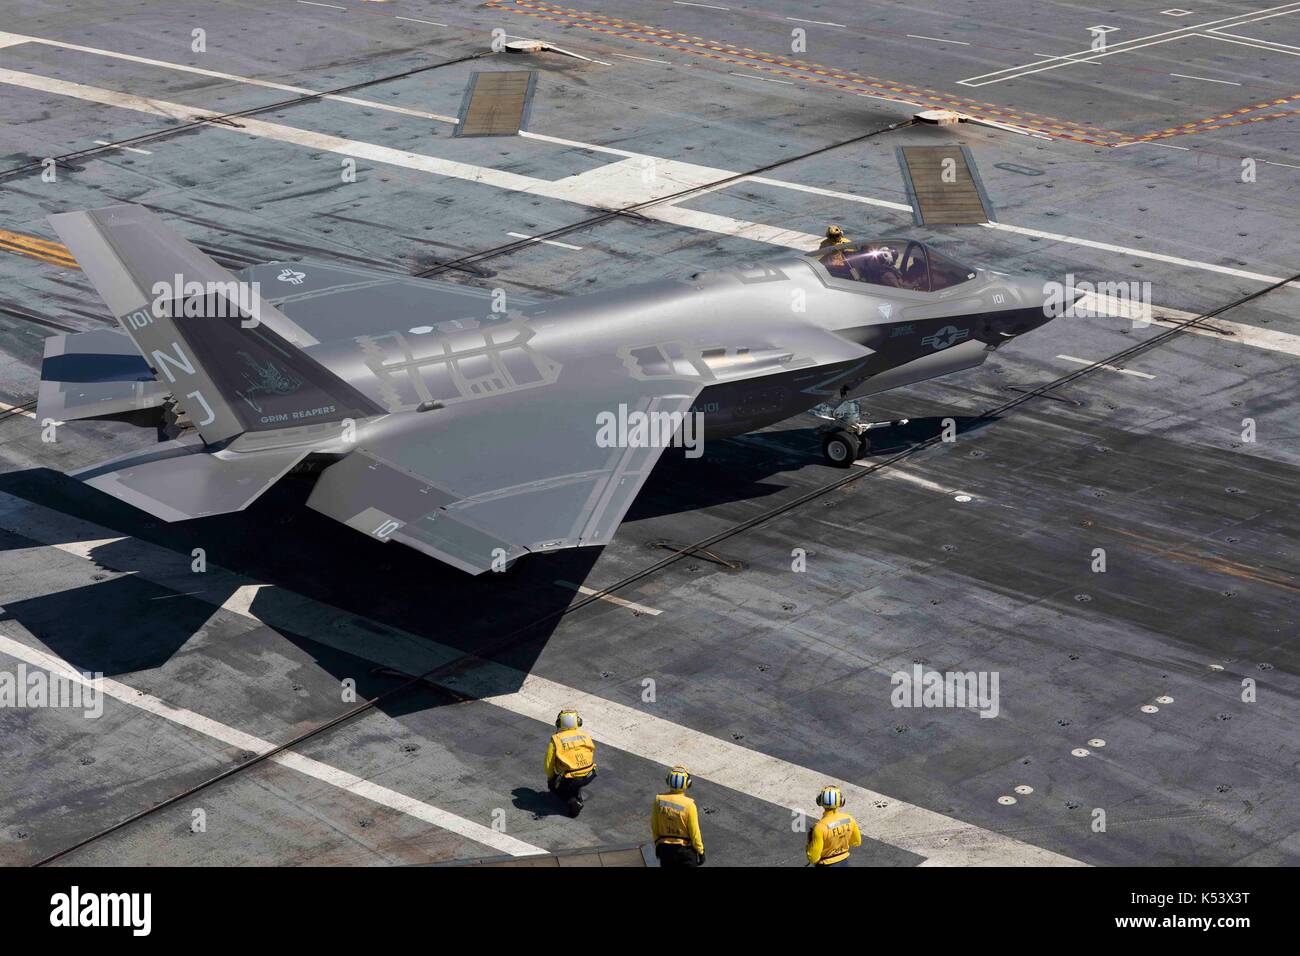 170904-N-AD724-0079 (ATLANTIC OCEAN) September 4, 2017 – An F-35C Lightning II, from the “Grim Reapers” of Strike Fighter Squadron 101 (VFA 101), taxi Stock Photo